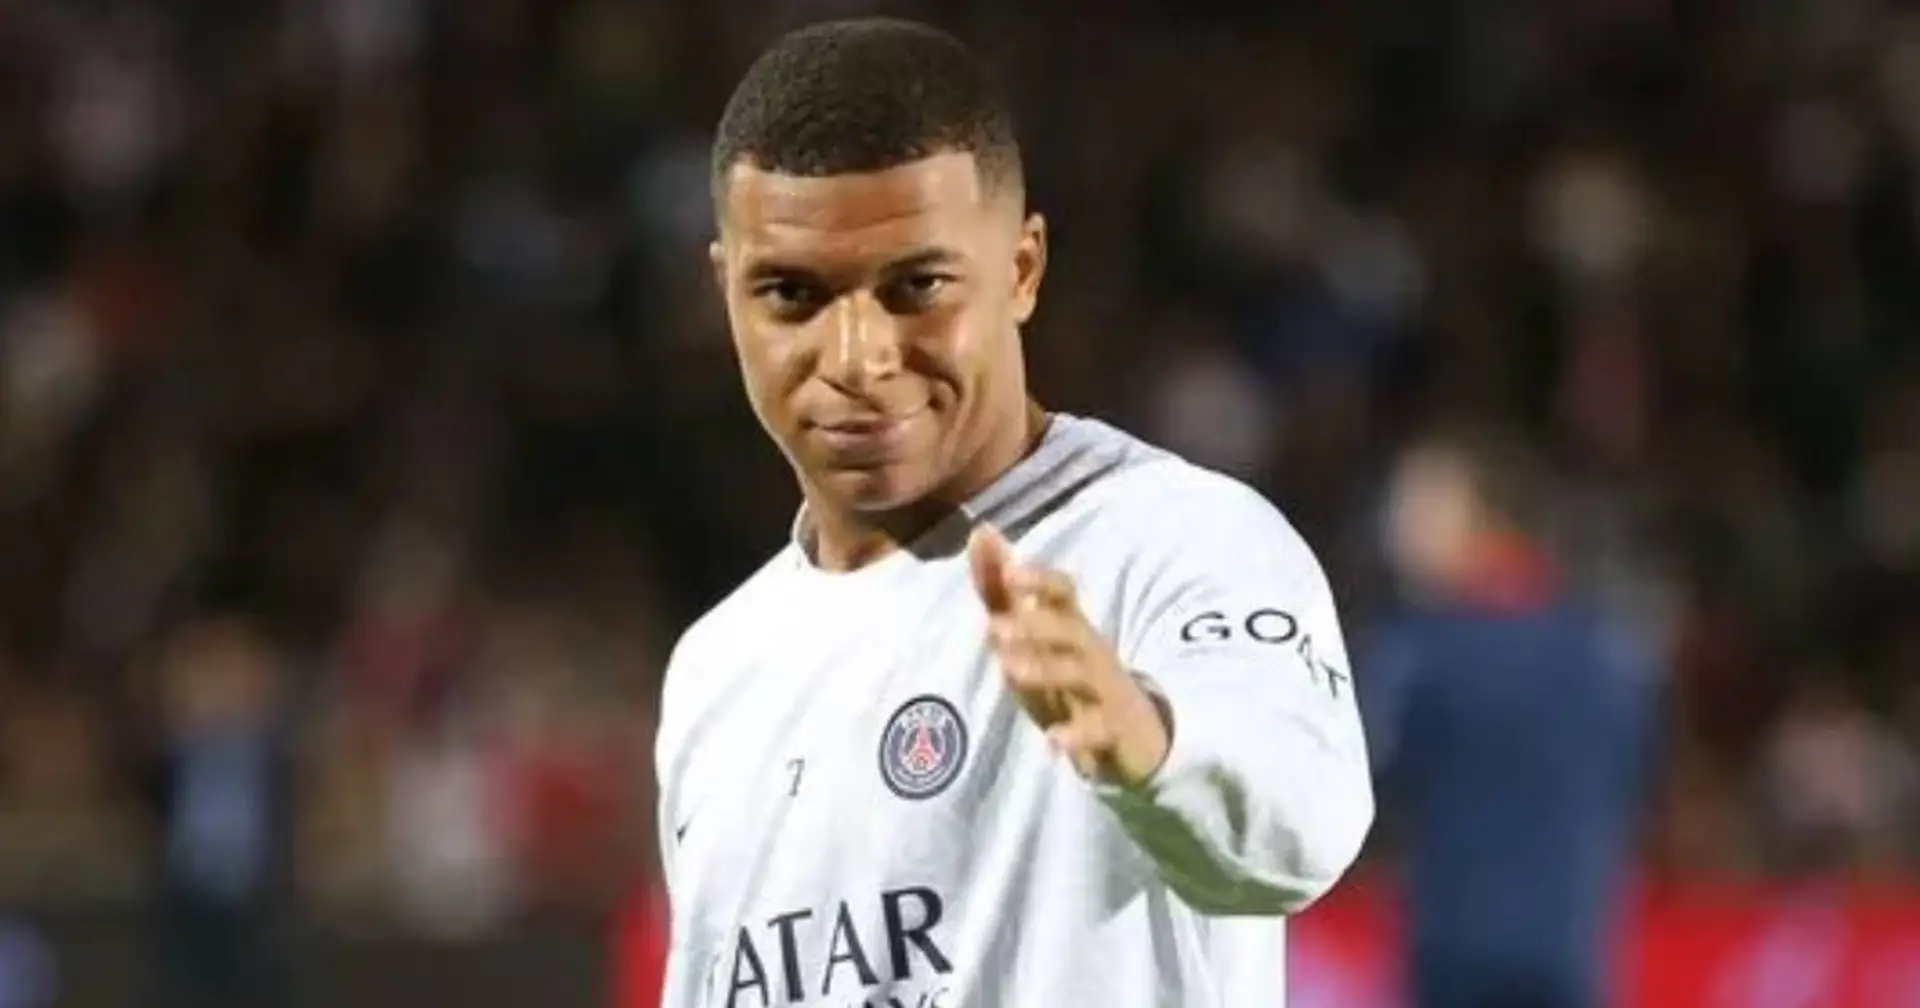 Arsenal miss out as Kylian Mbappe 'agrees' pay cut to join Real Madrid